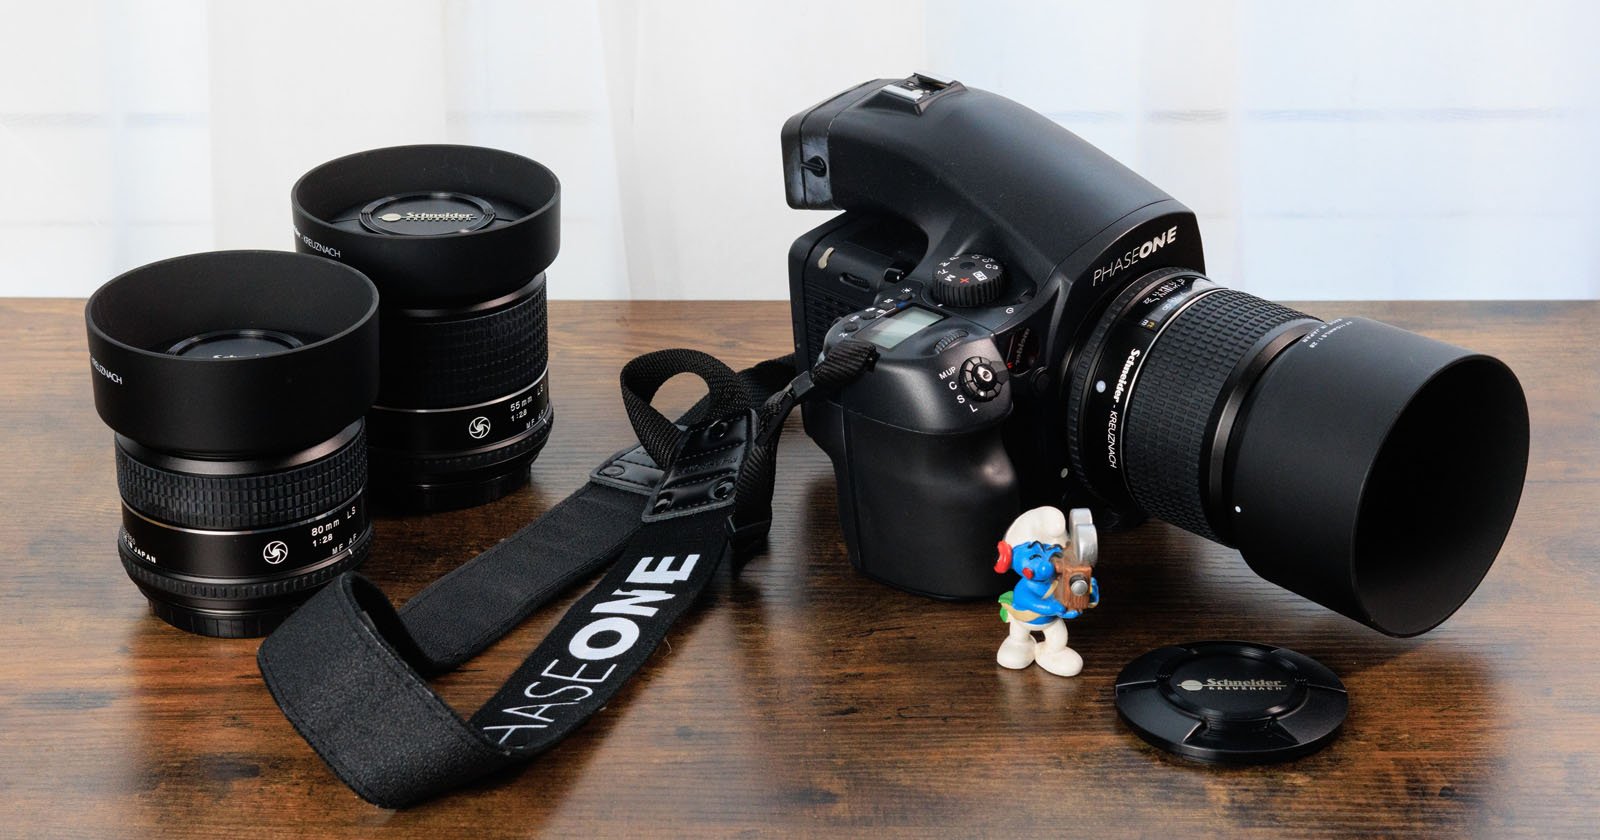  photographer gifted full phase one kit after impromptu 